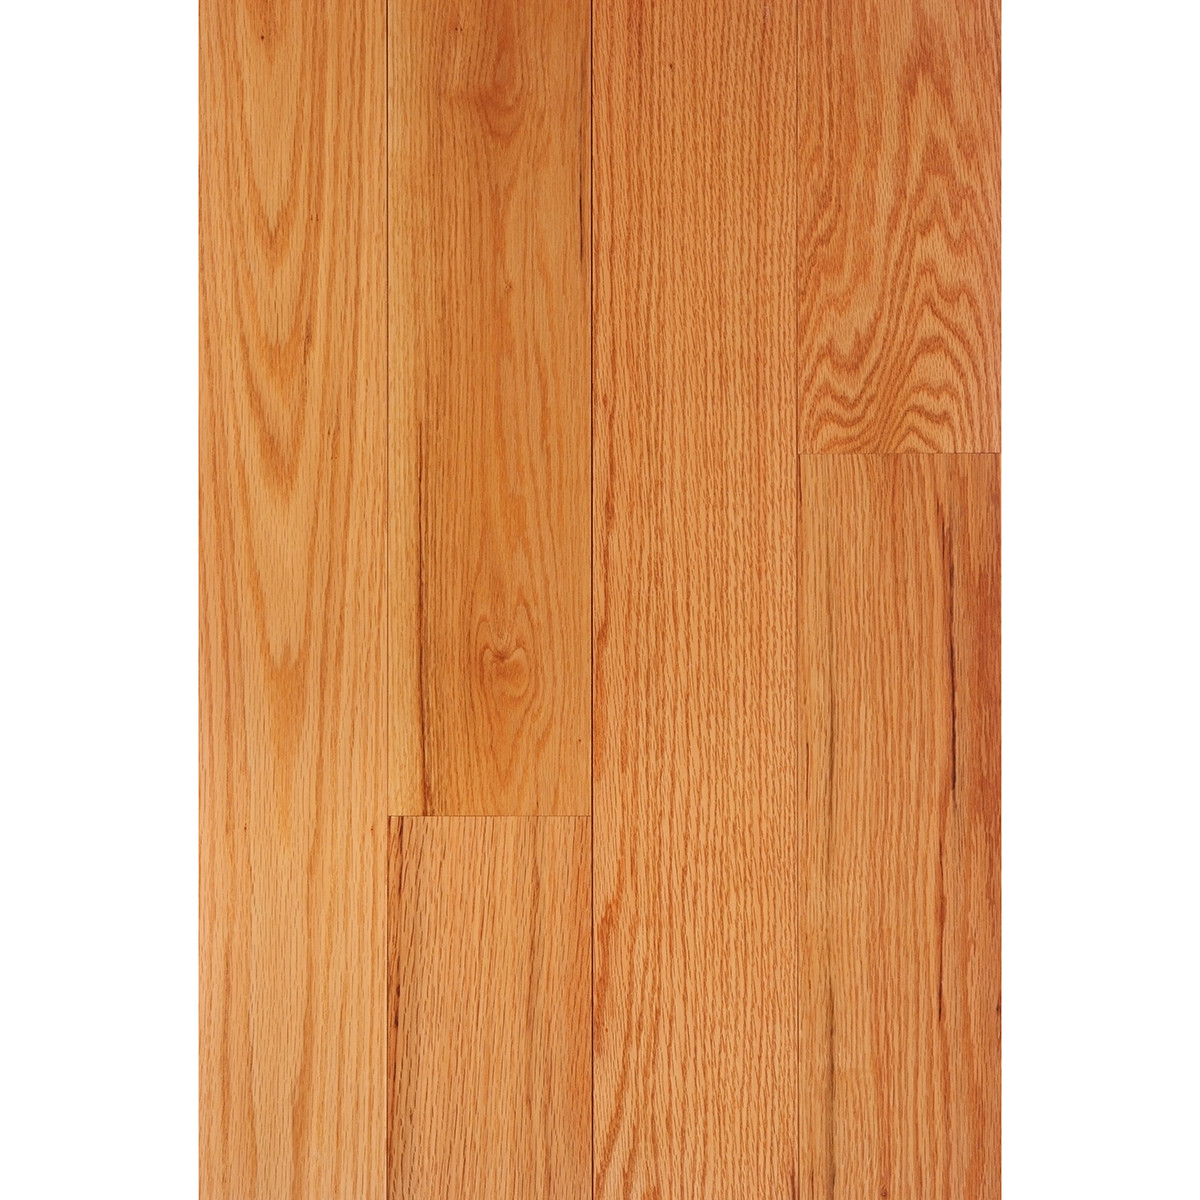 27 Nice 3 1 4 Unfinished Hardwood Flooring 2023 free download 3 1 4 unfinished hardwood flooring of red oak 3 4 x 5 select grade flooring throughout prefinished clear semi gloss 3 4